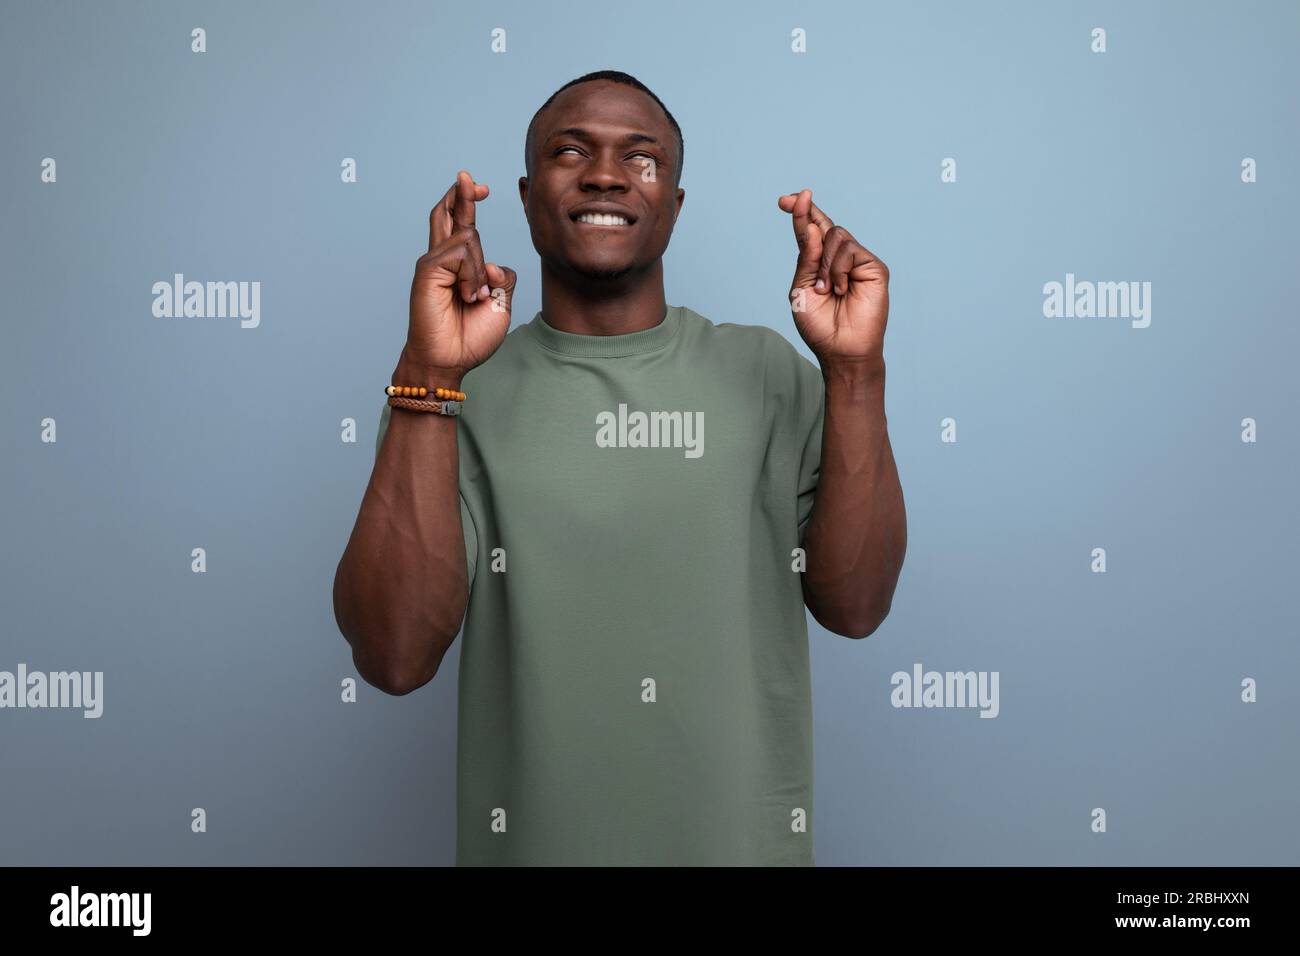 young attractive african man dressed in t-shirt hopes for good luck on ...